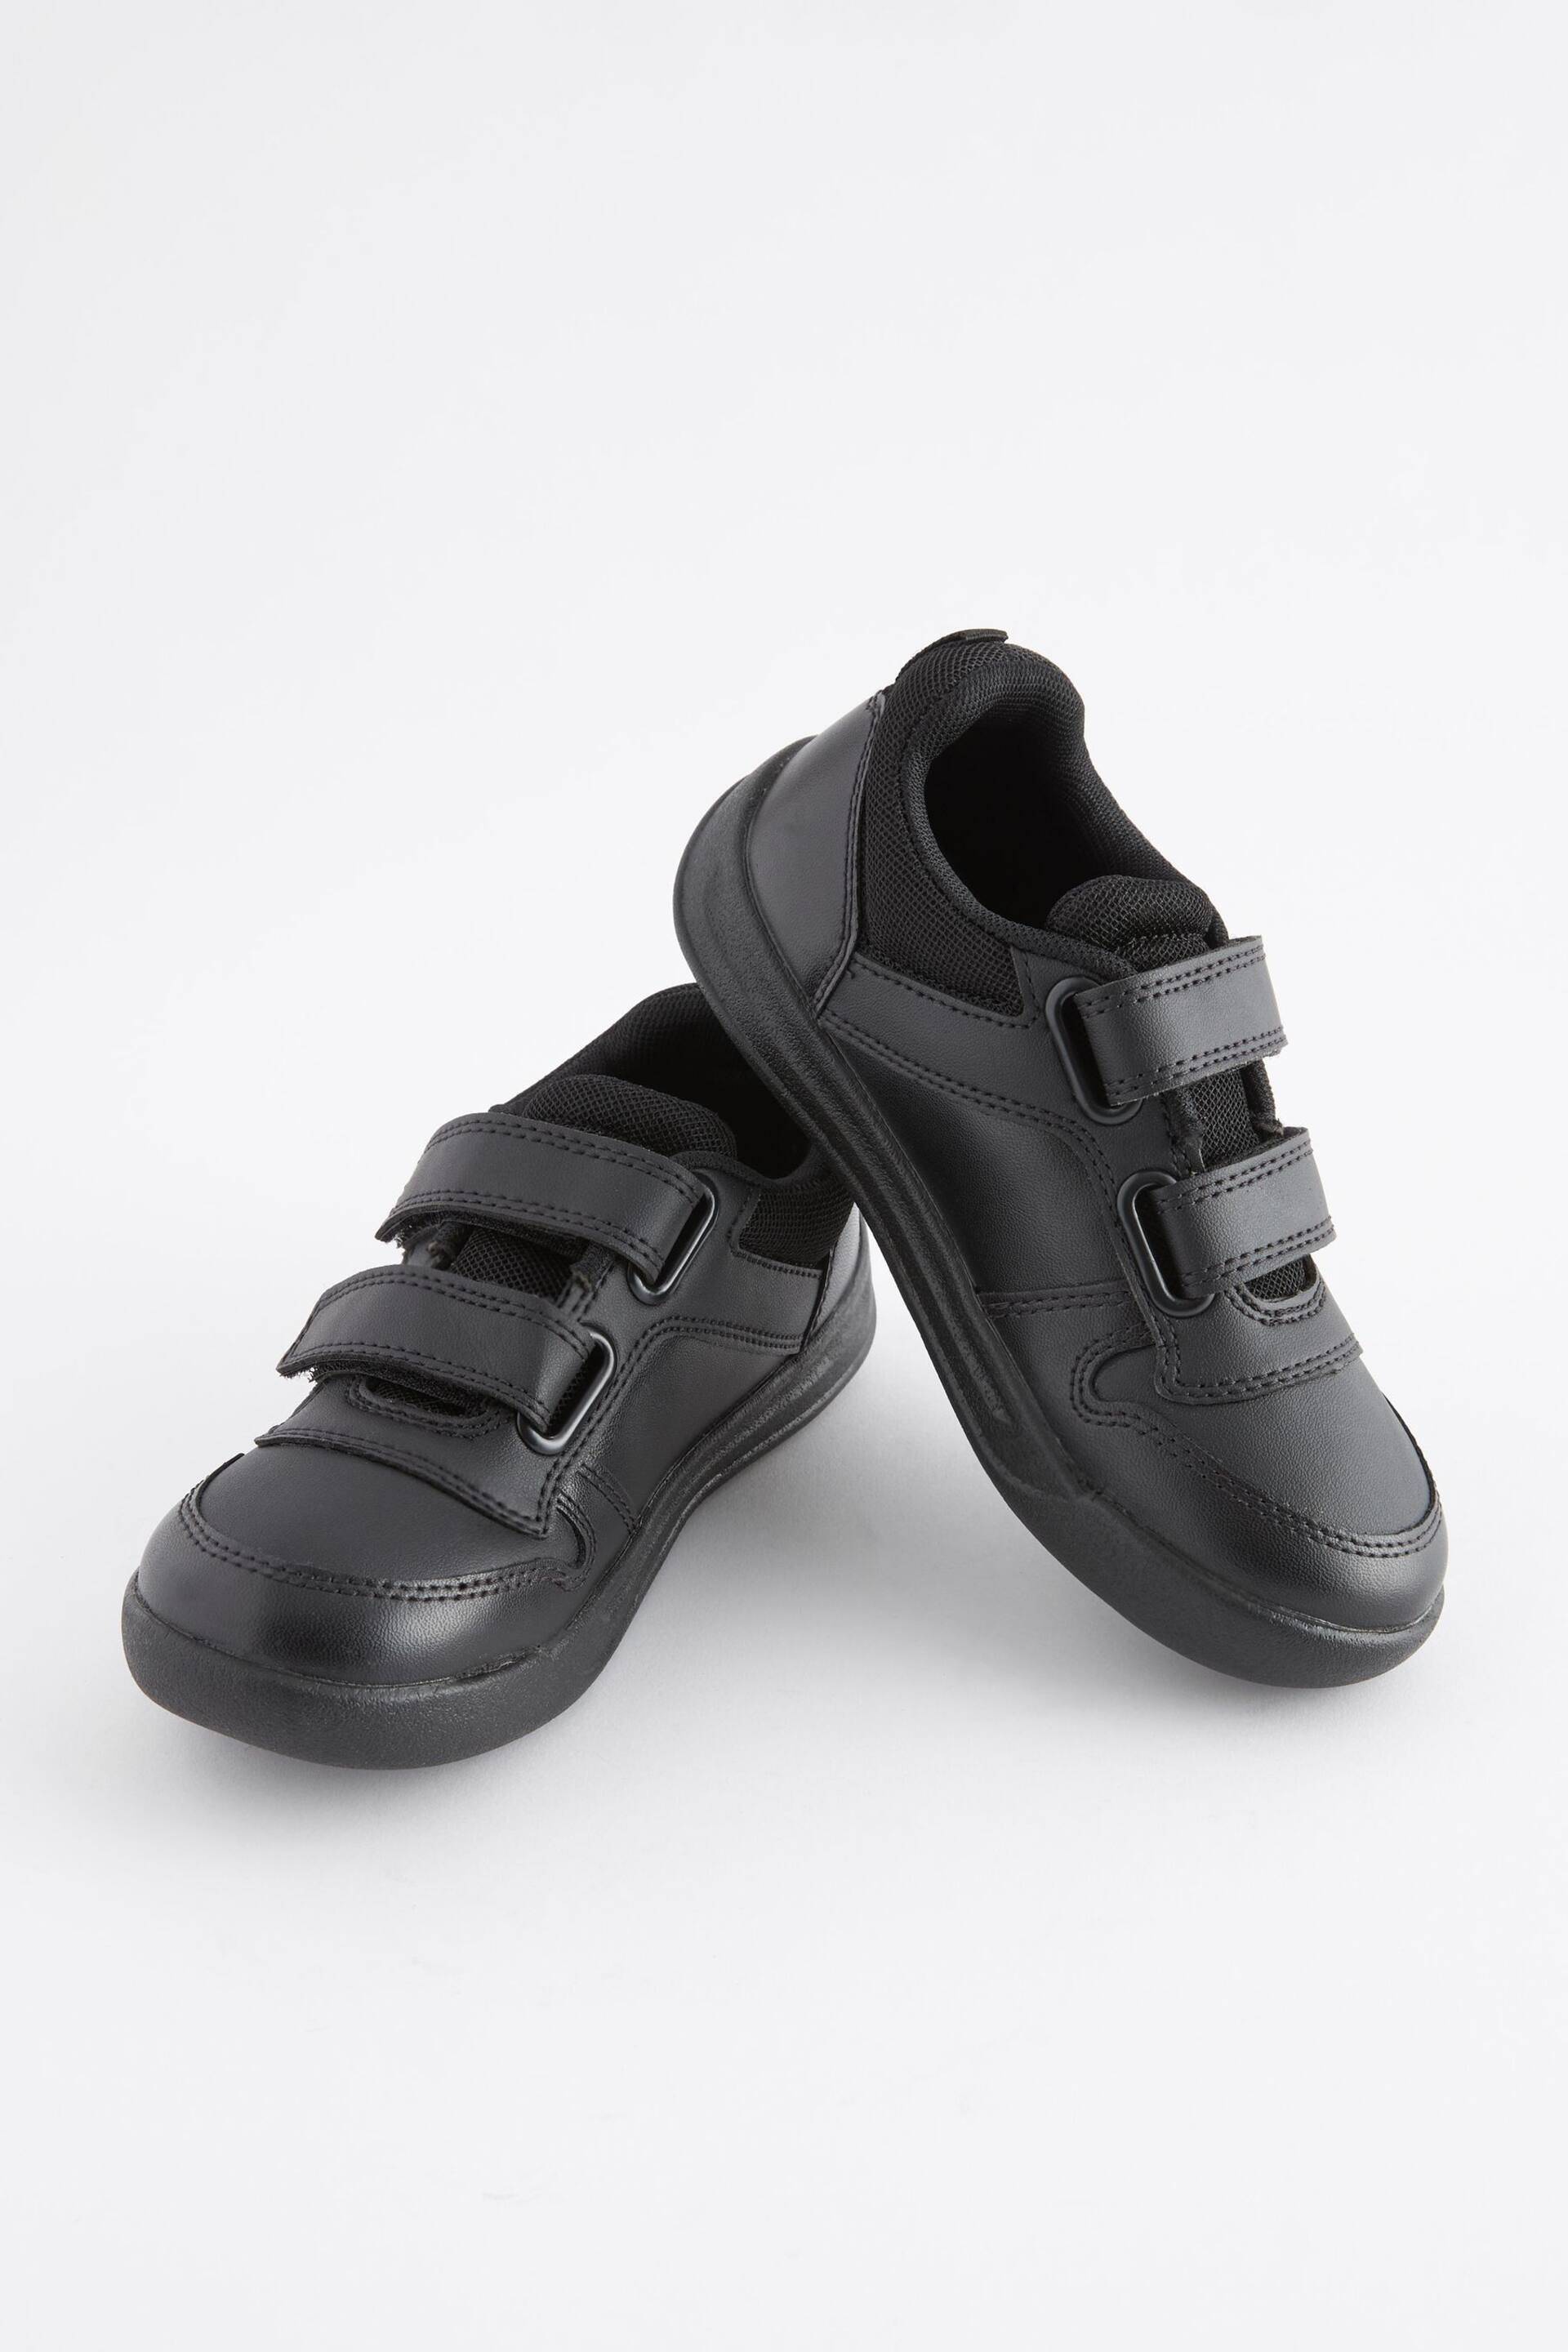 Black Strap Touch Fasten Extra Wide Fit (H) School Trainers - Image 1 of 6